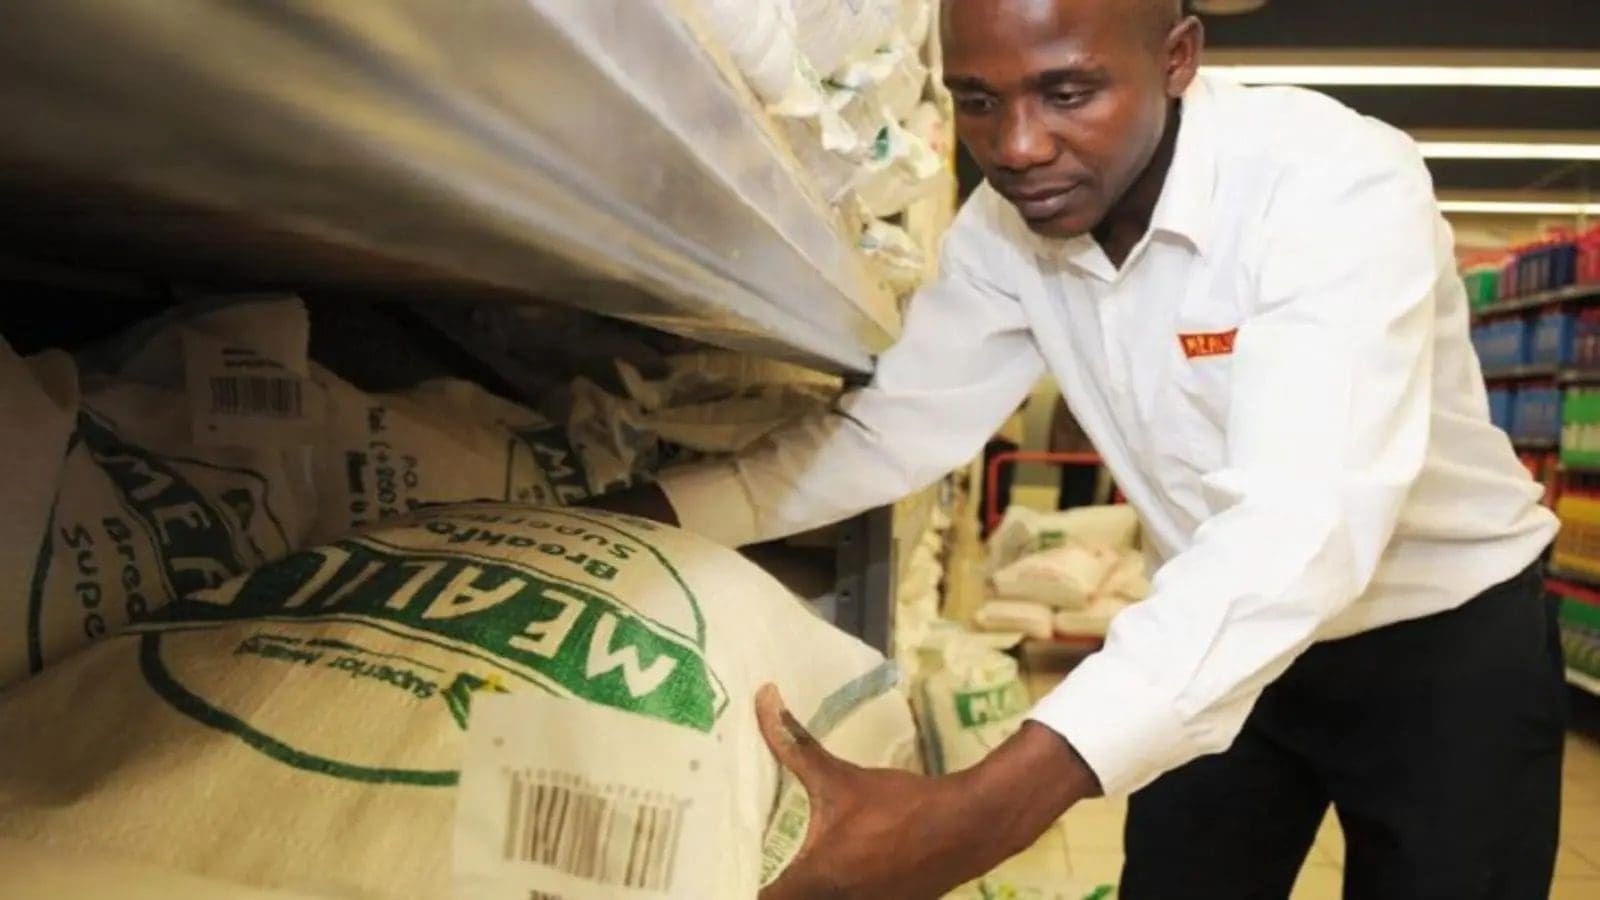 Zambia to promote community sales in a bid to stabilize the skyrocketing price of maize meal